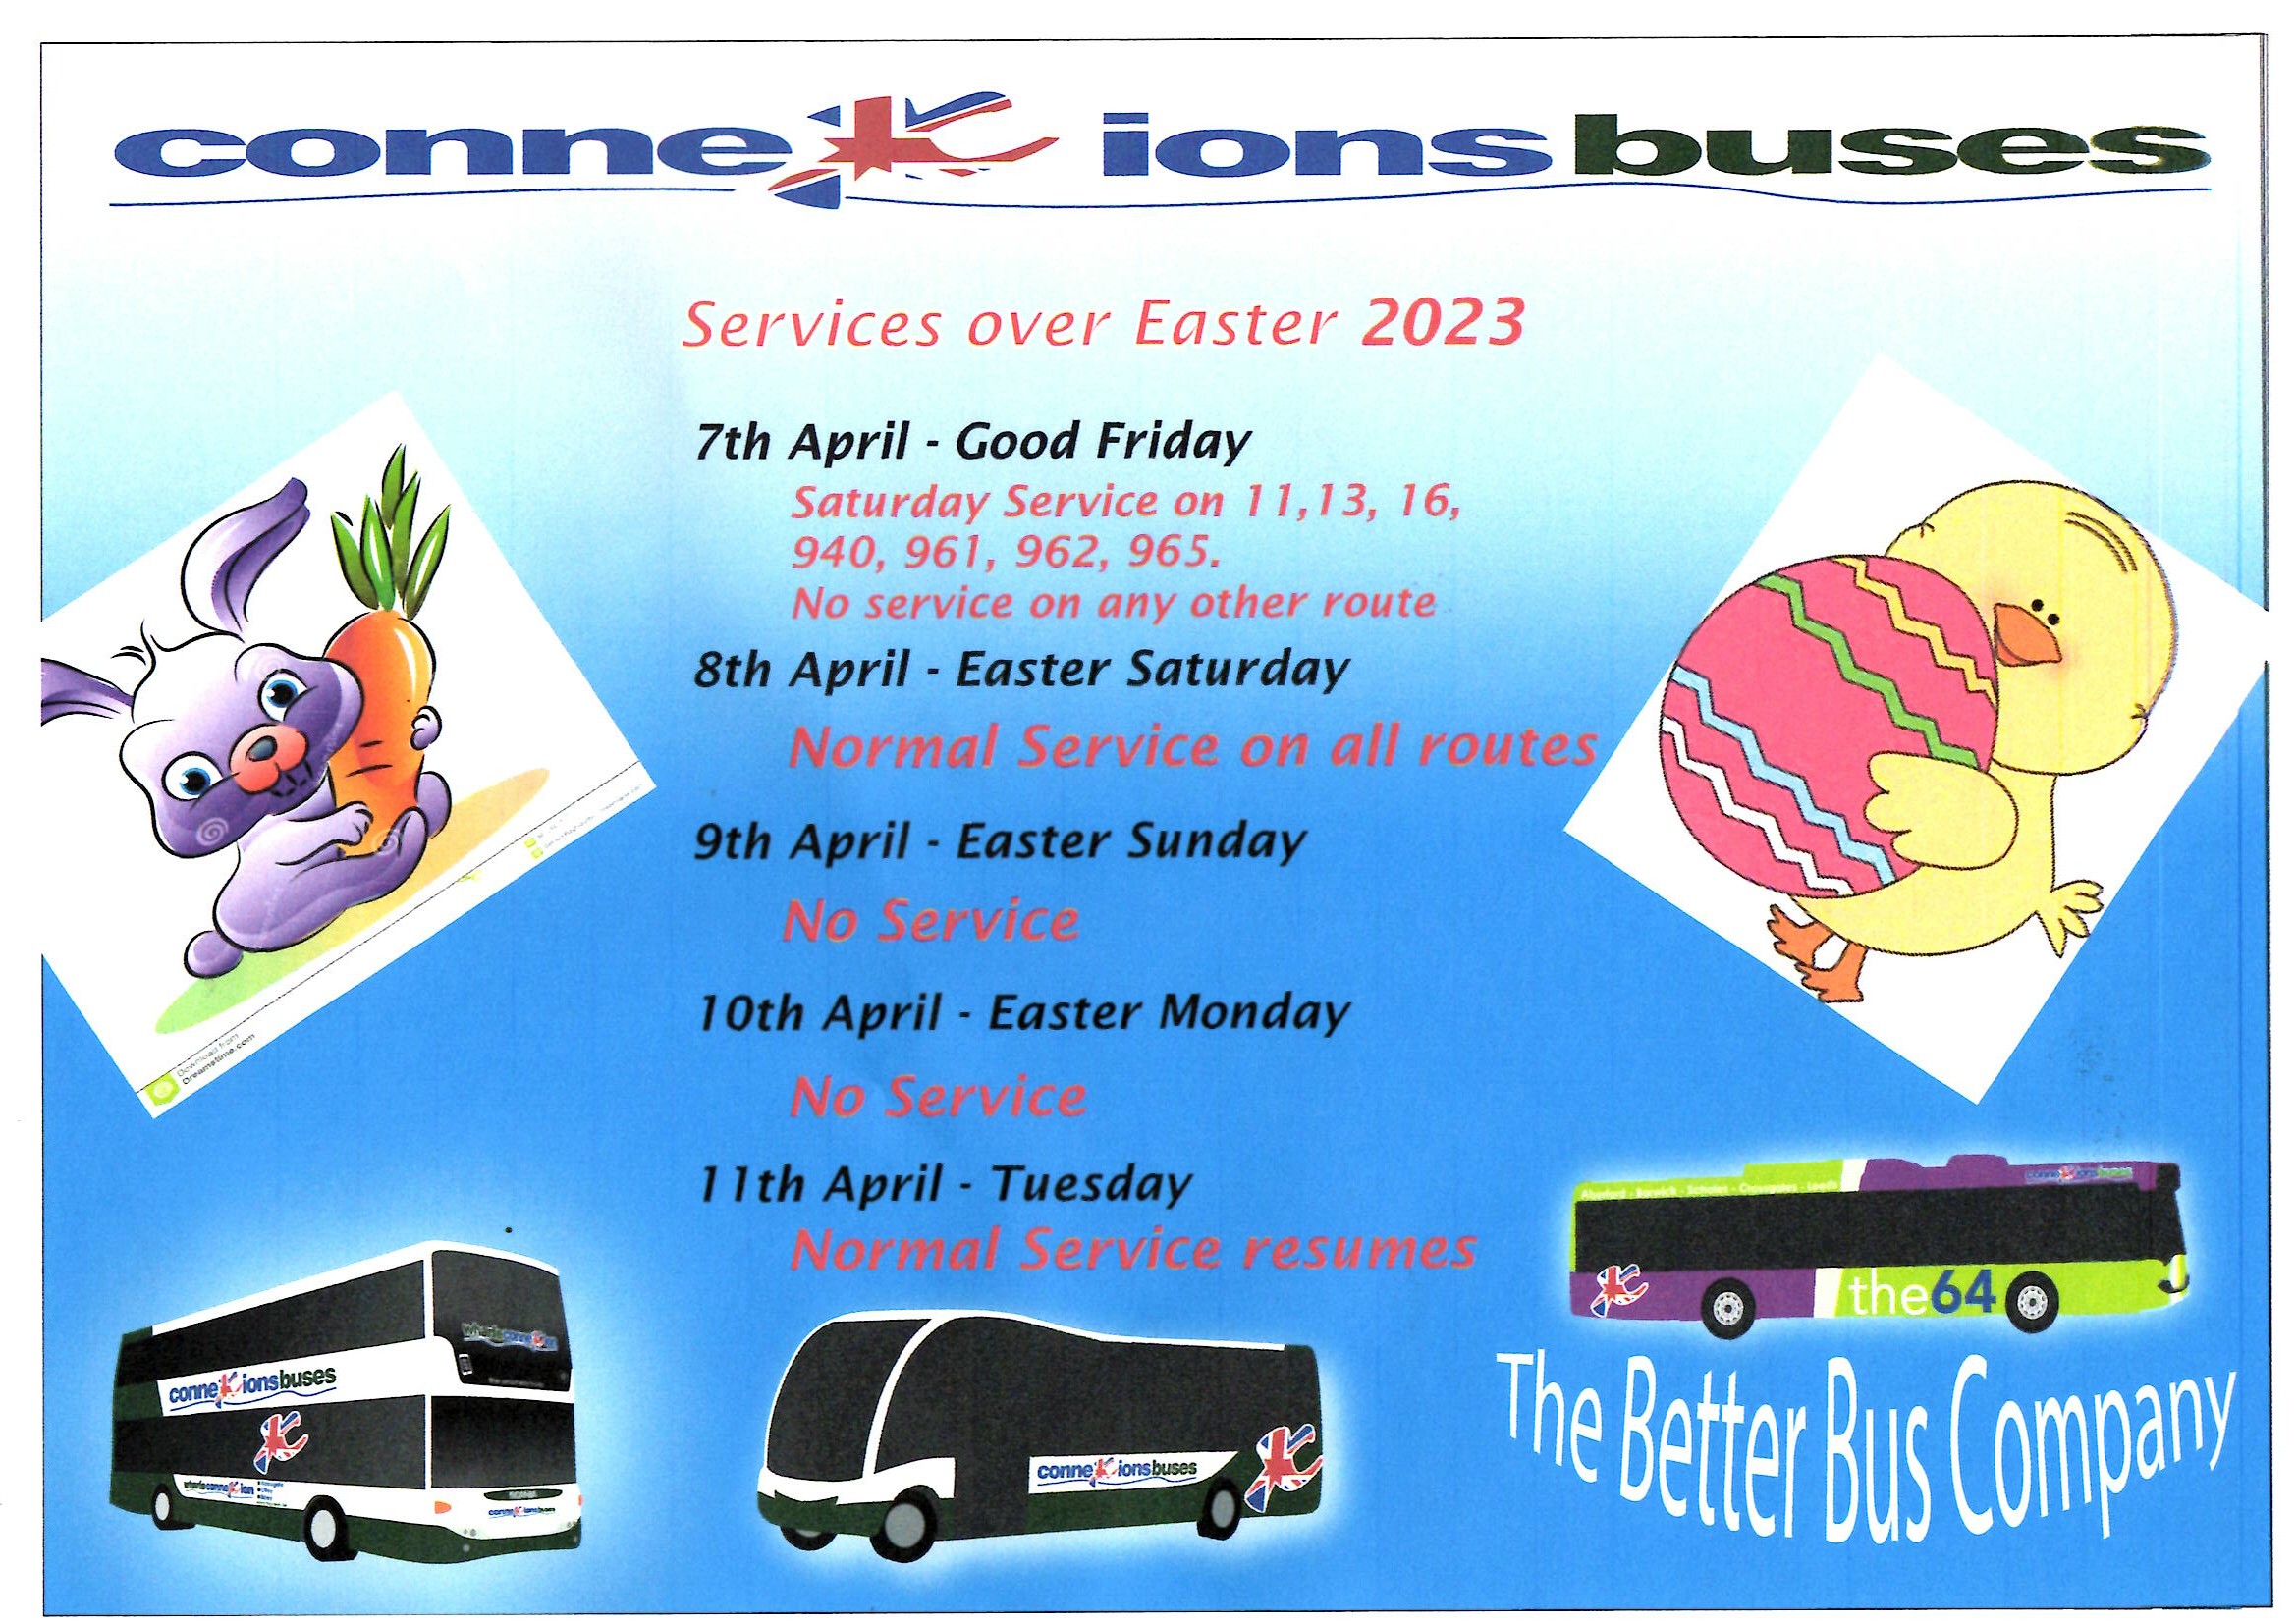 On Good Friday, we will be operating services 11, 13, 16, 940, 061, 962, 965 ONLY and these are to a Saturday timetable